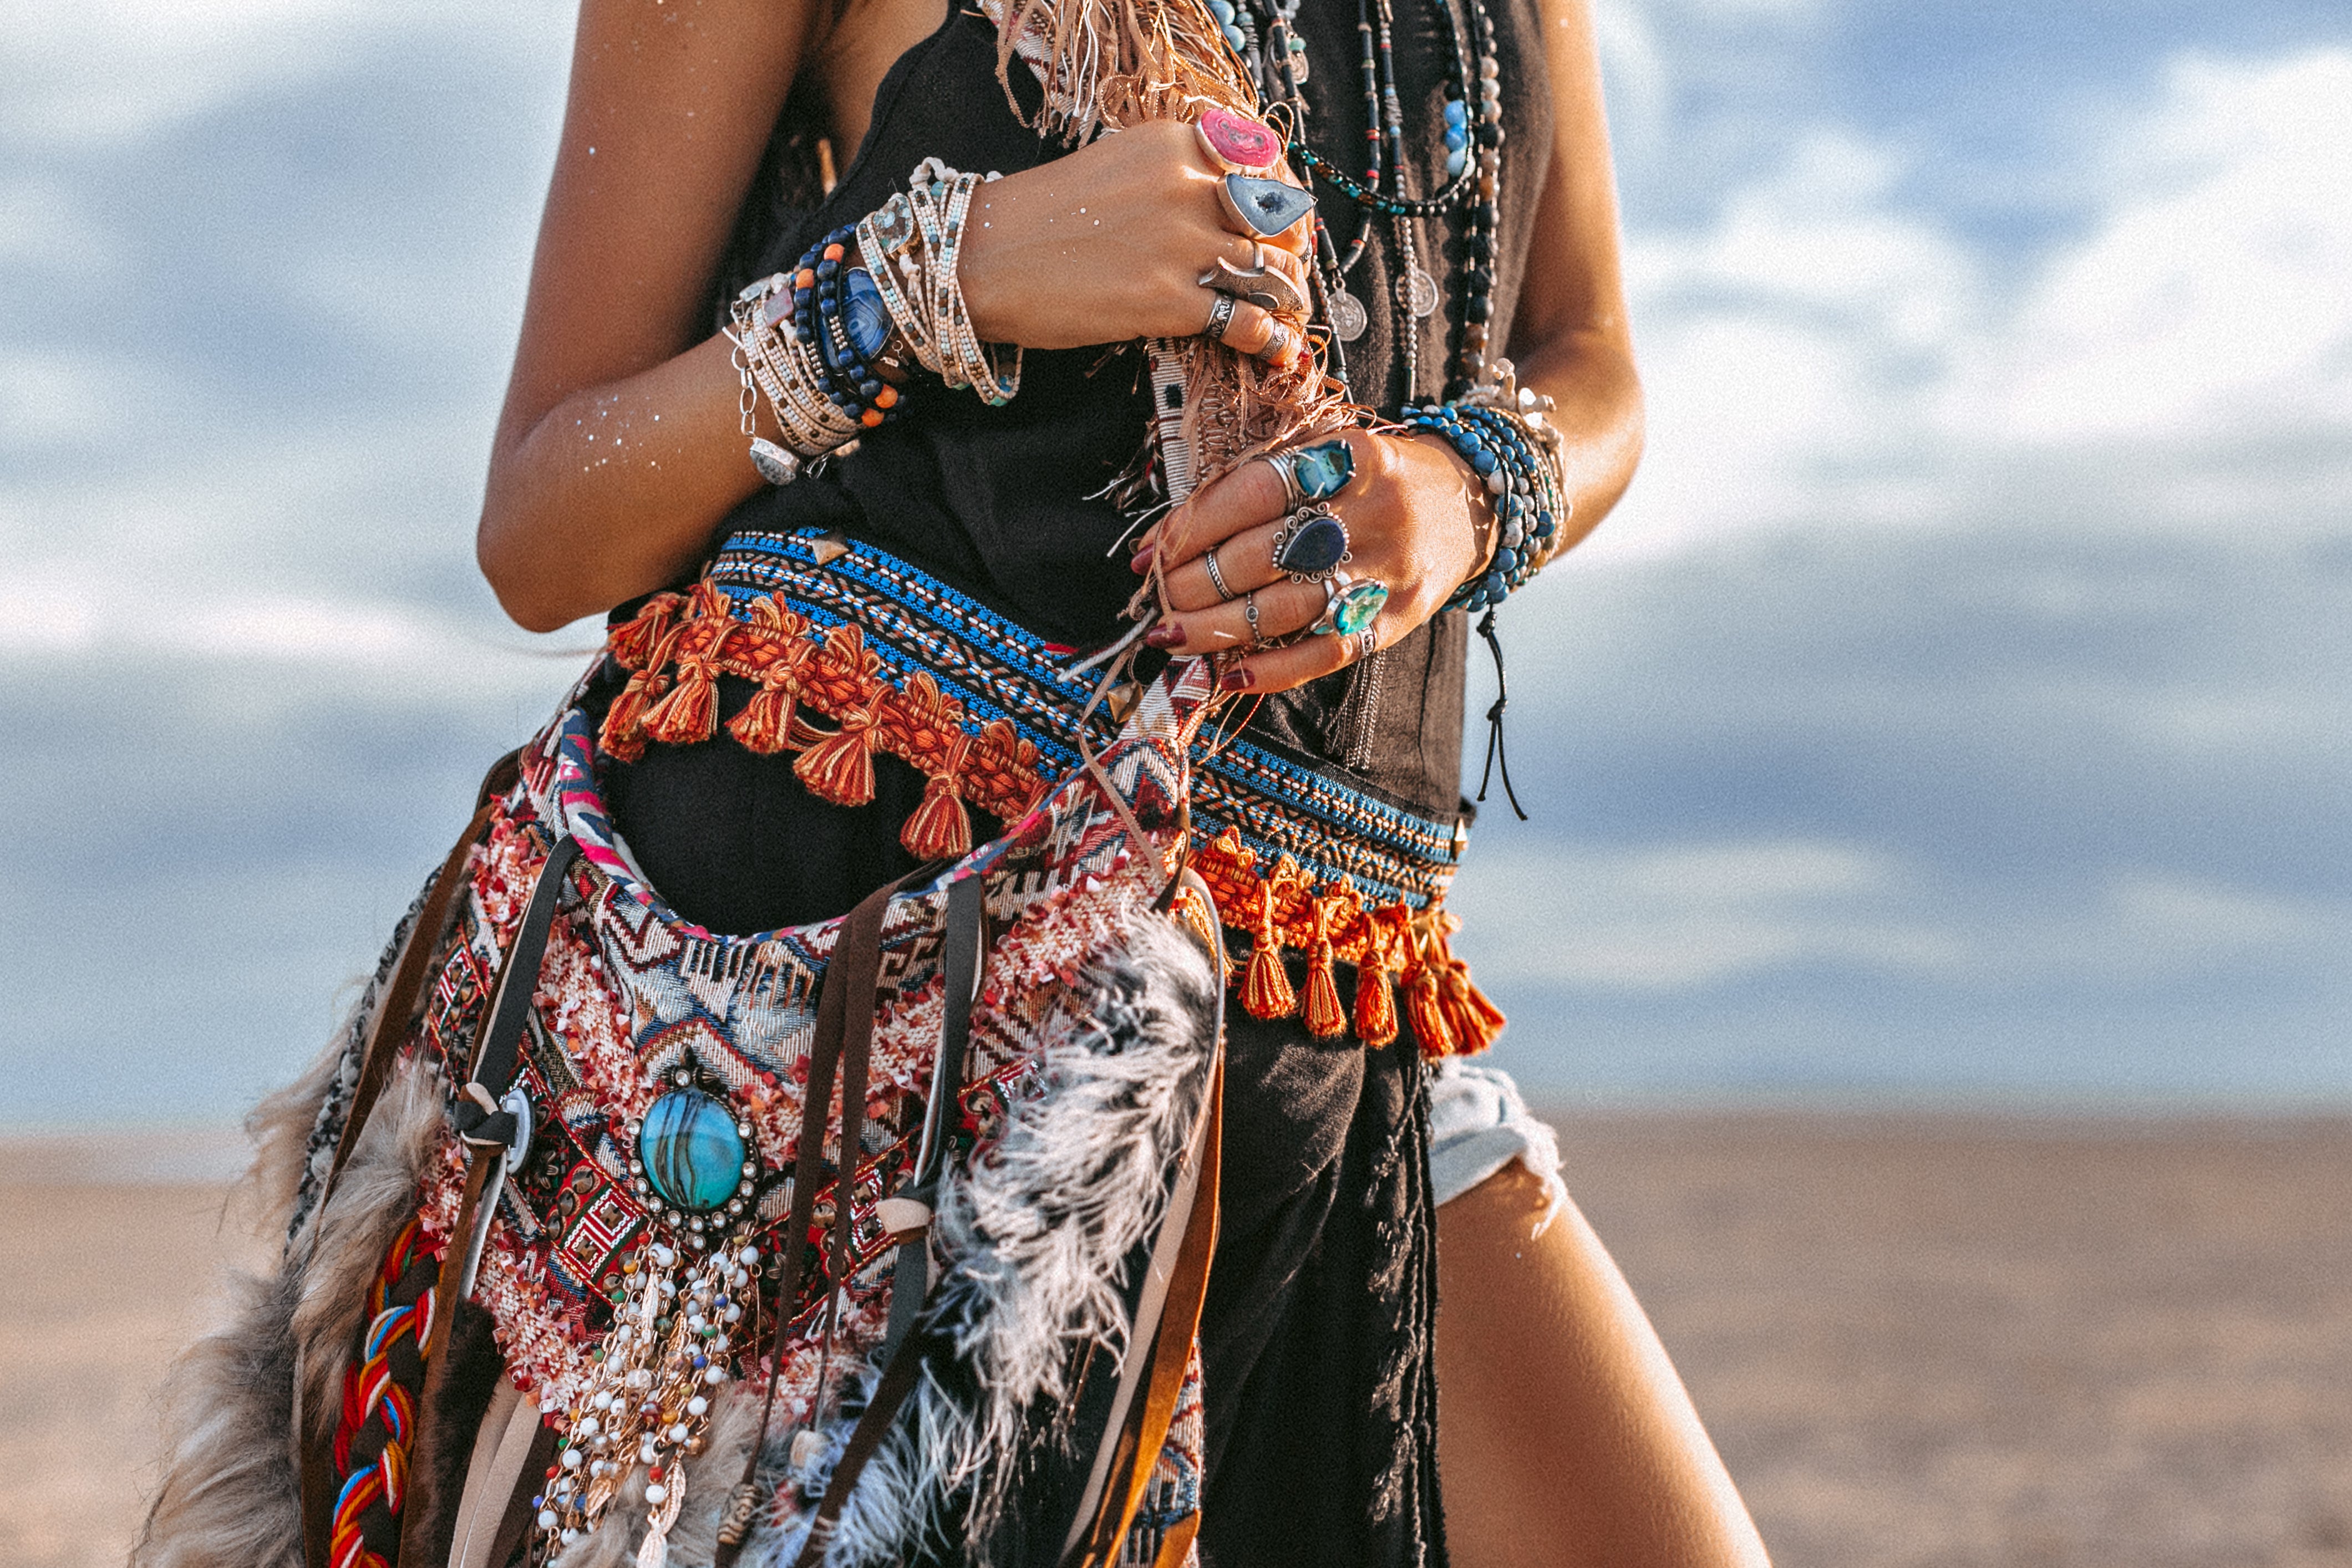 Boho girl with bracelets on her arms and rings on her fingers on beach carries a boho festival fringe bag 